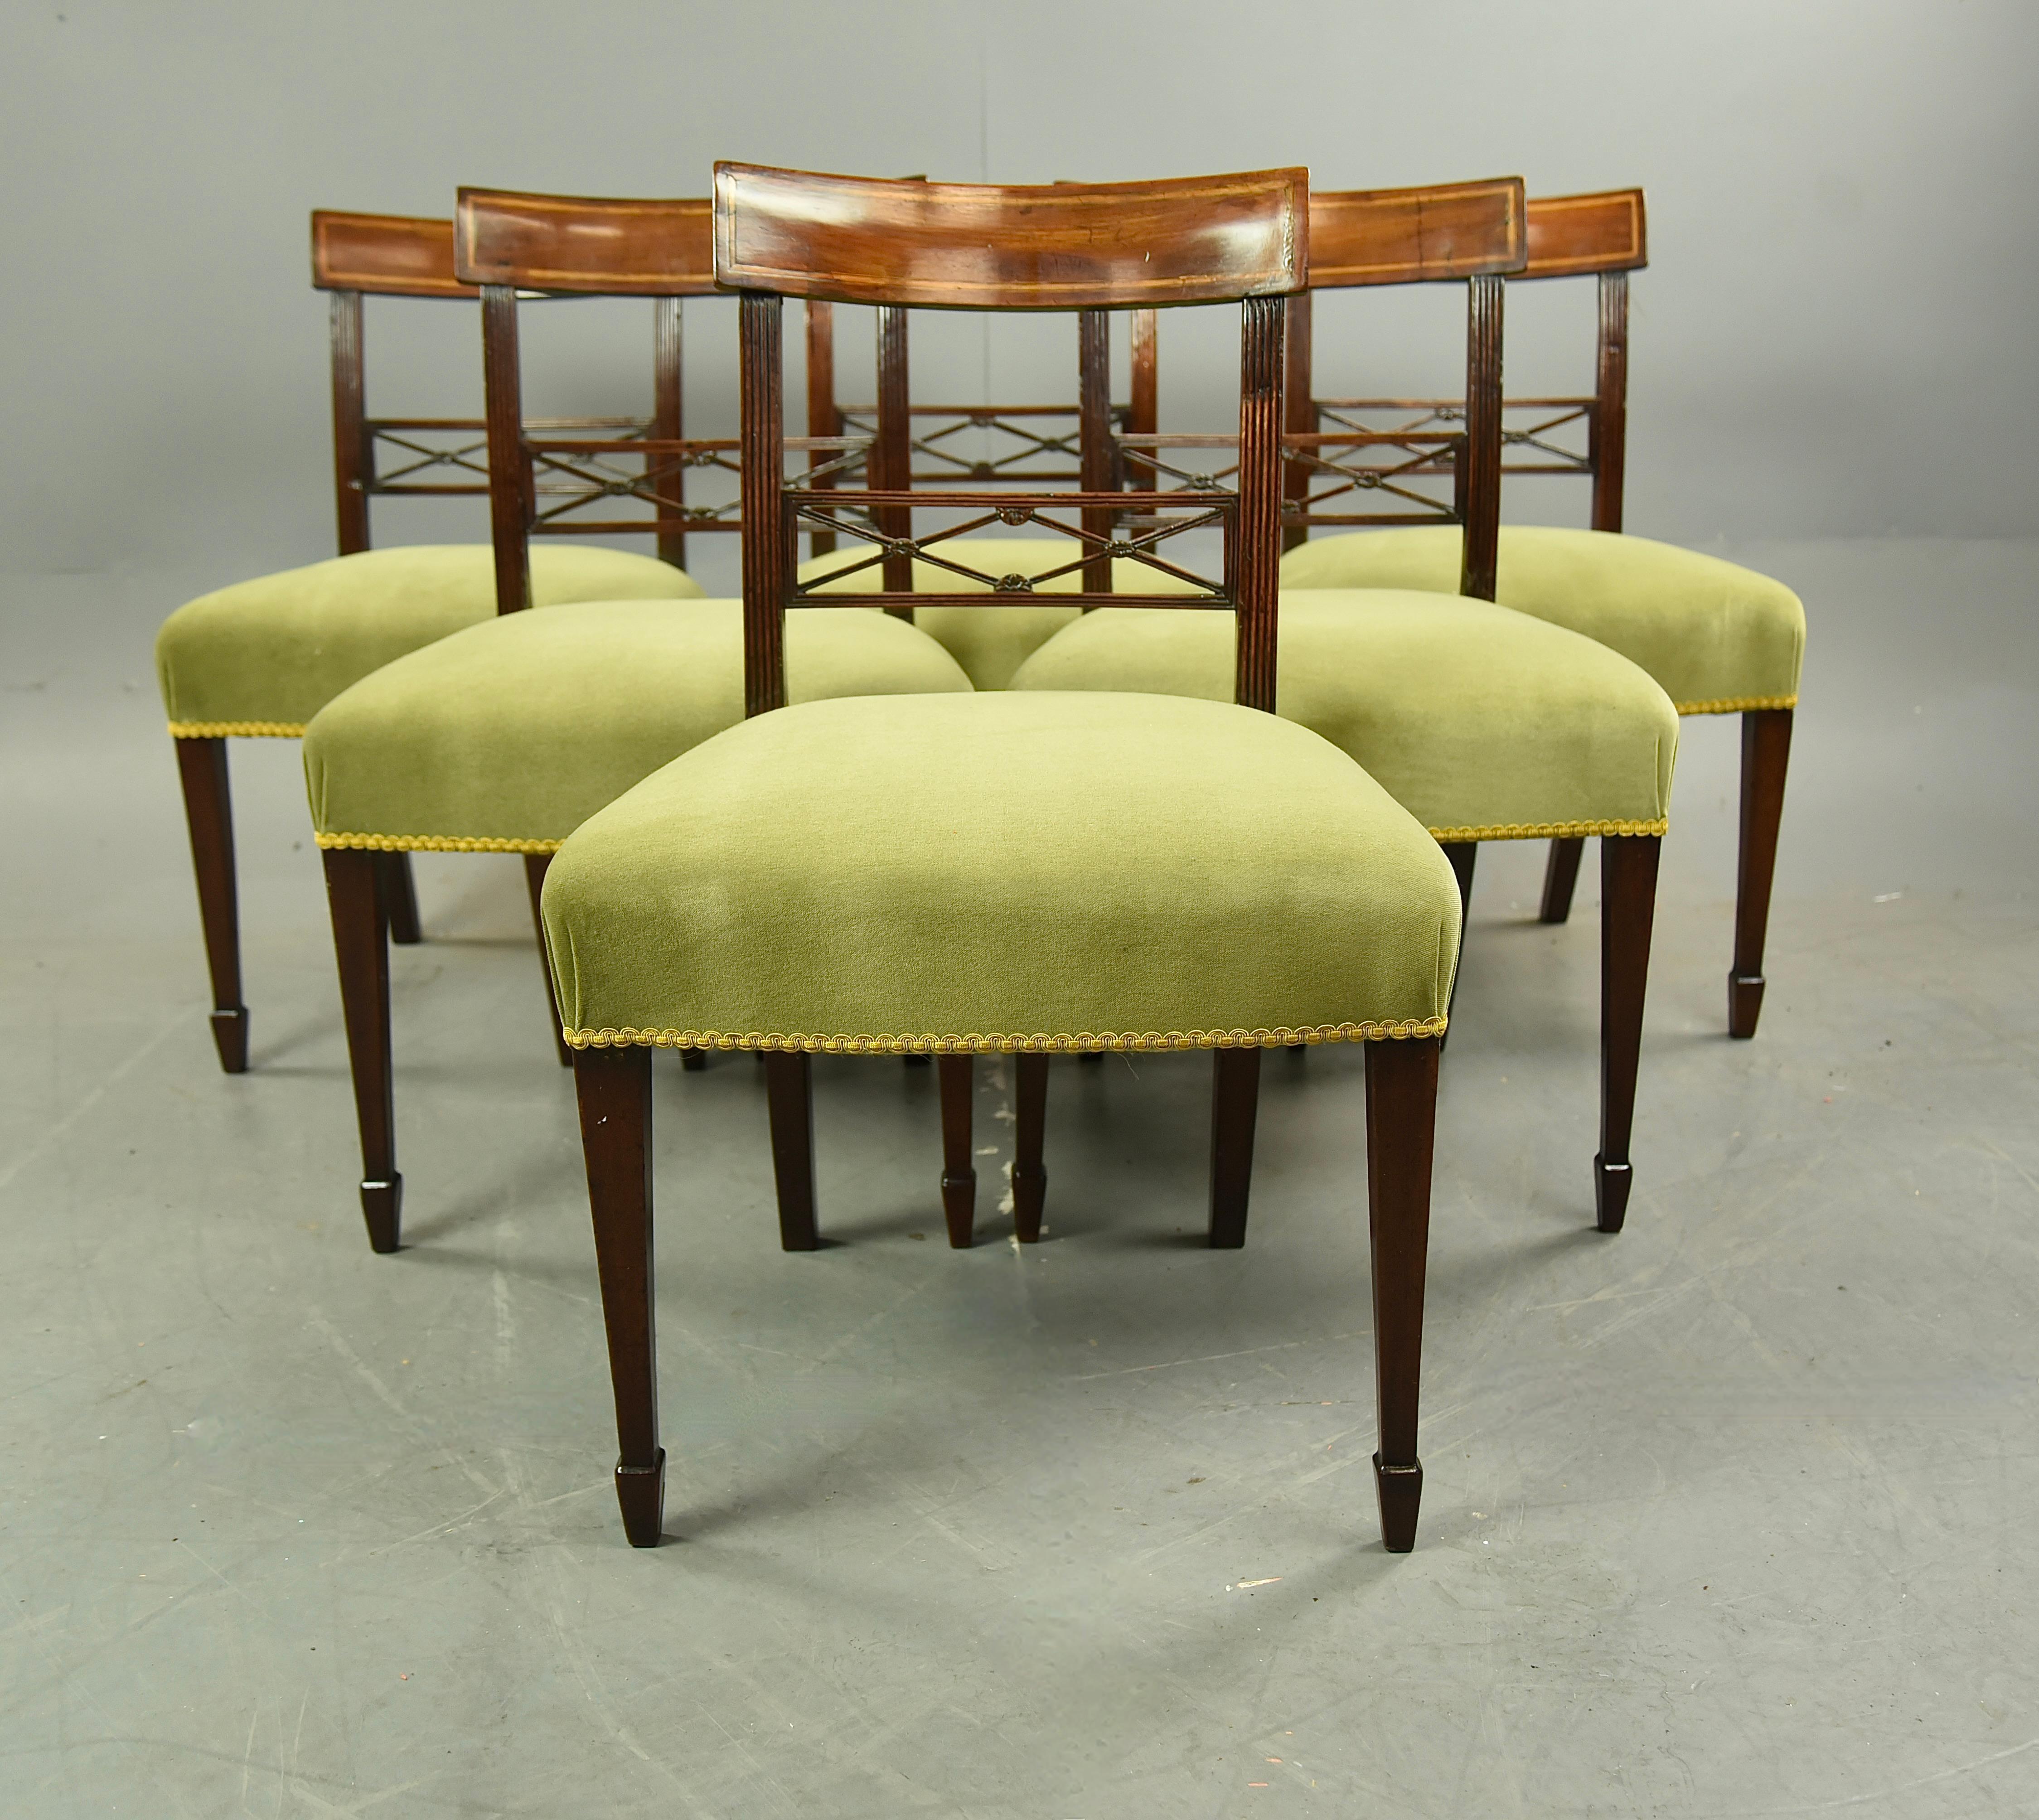 Fine set of six Regency mahogany dining chairs circa 1820 .
The chairs are constructed of solid mahogany through out ,they are all solid in joint and woodworm free .
They have been through our workshop and have been cleaned waxed and re upholstered